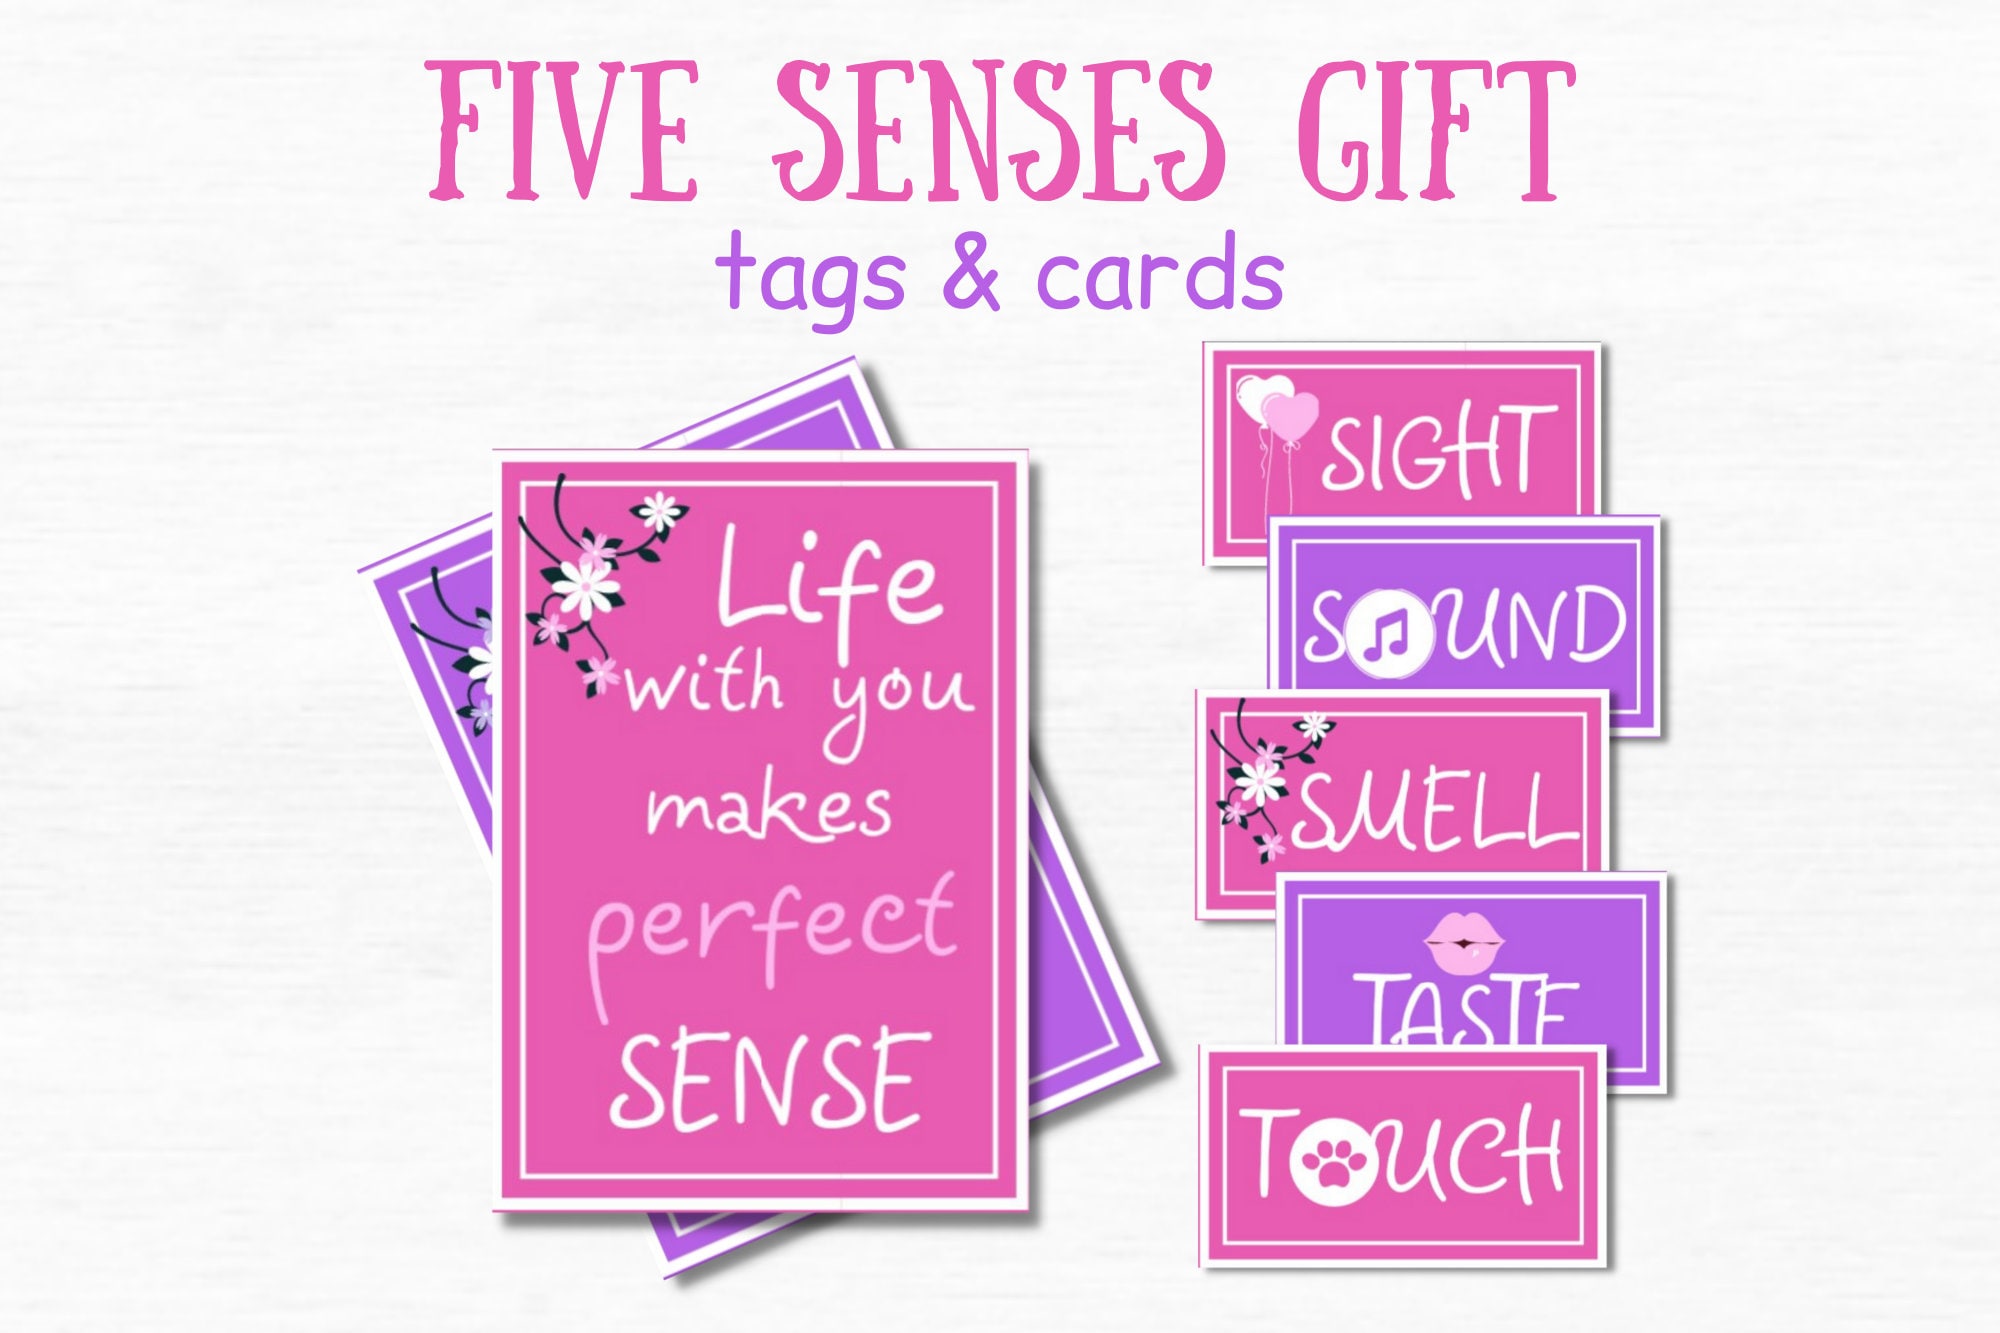 5 Senses Gift Tags One Year Anniversary Gifts for Boyfriend -   5  sense gift, Romantic gifts for him, Boyfriend anniversary gifts